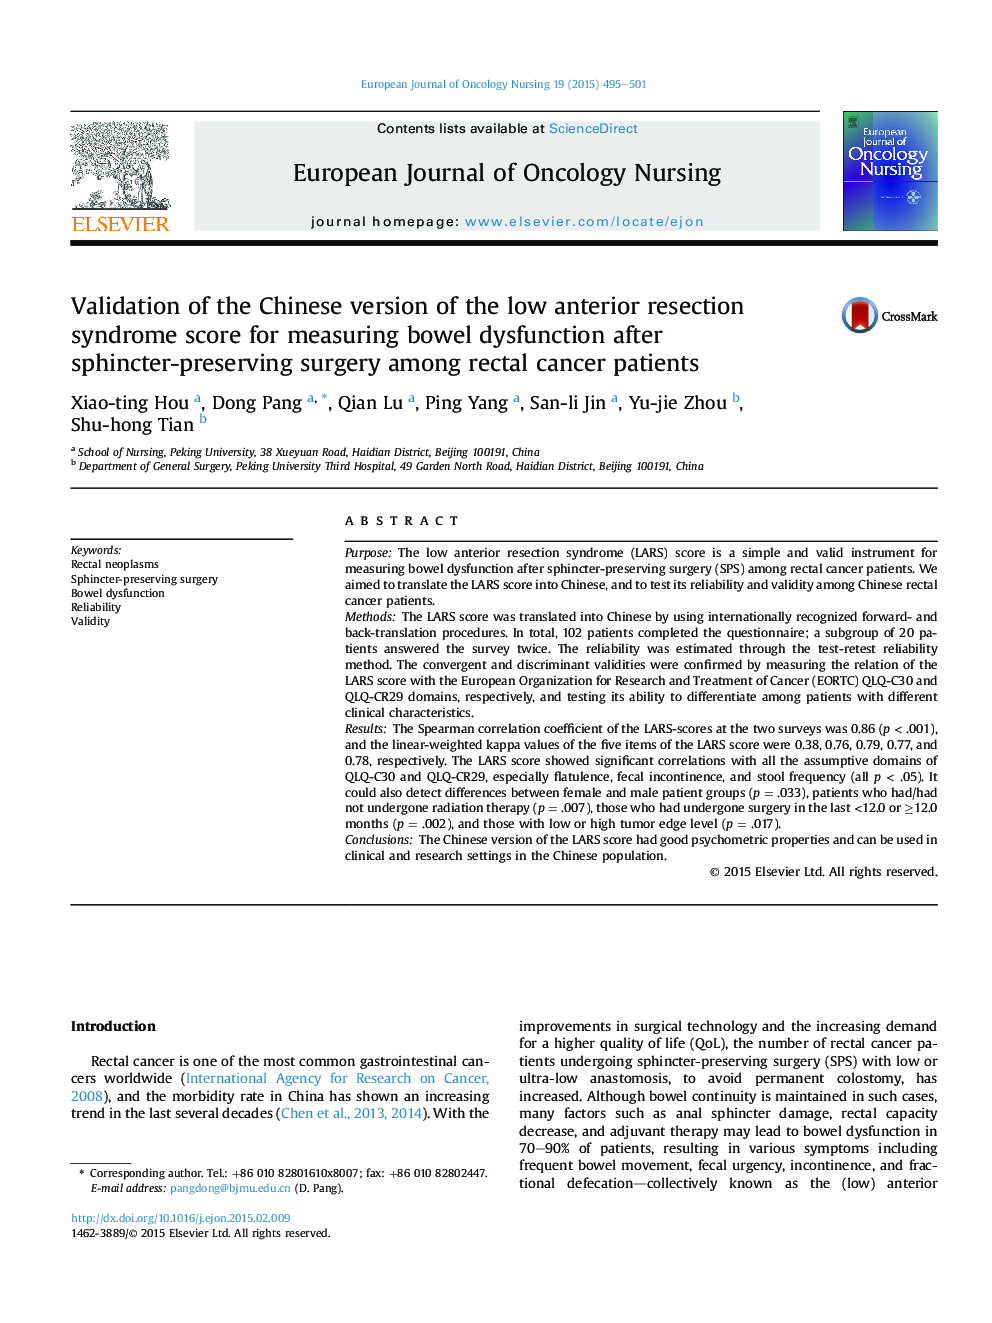 Validation of the Chinese version of the low anterior resection syndrome score for measuring bowel dysfunction after sphincter-preserving surgery among rectal cancer patients